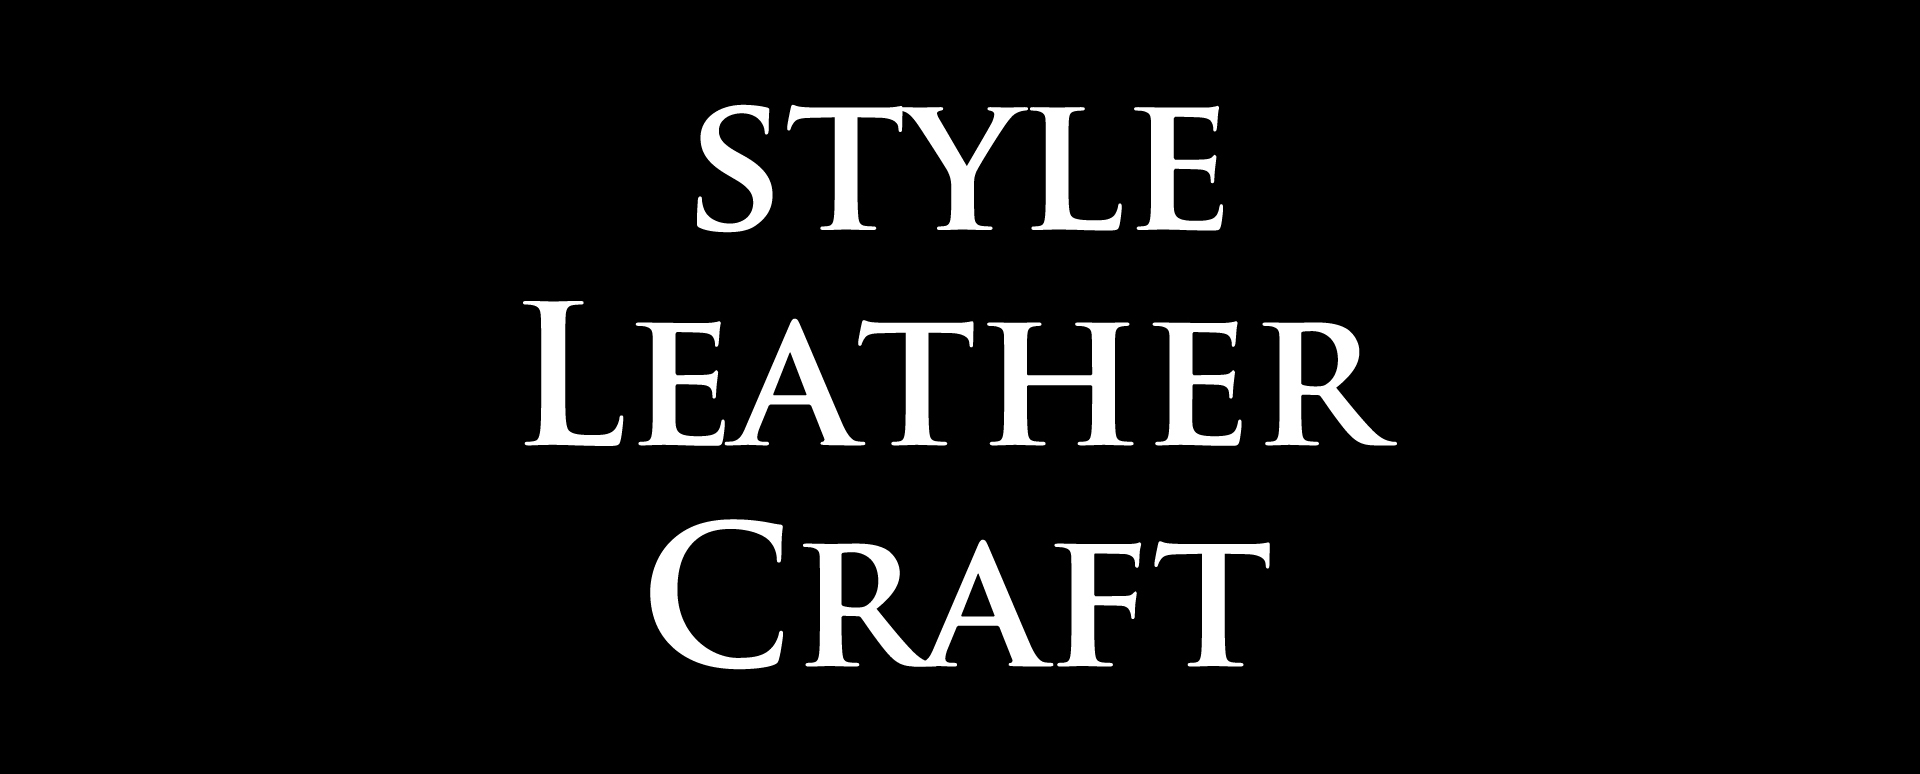 Style Leather Craft